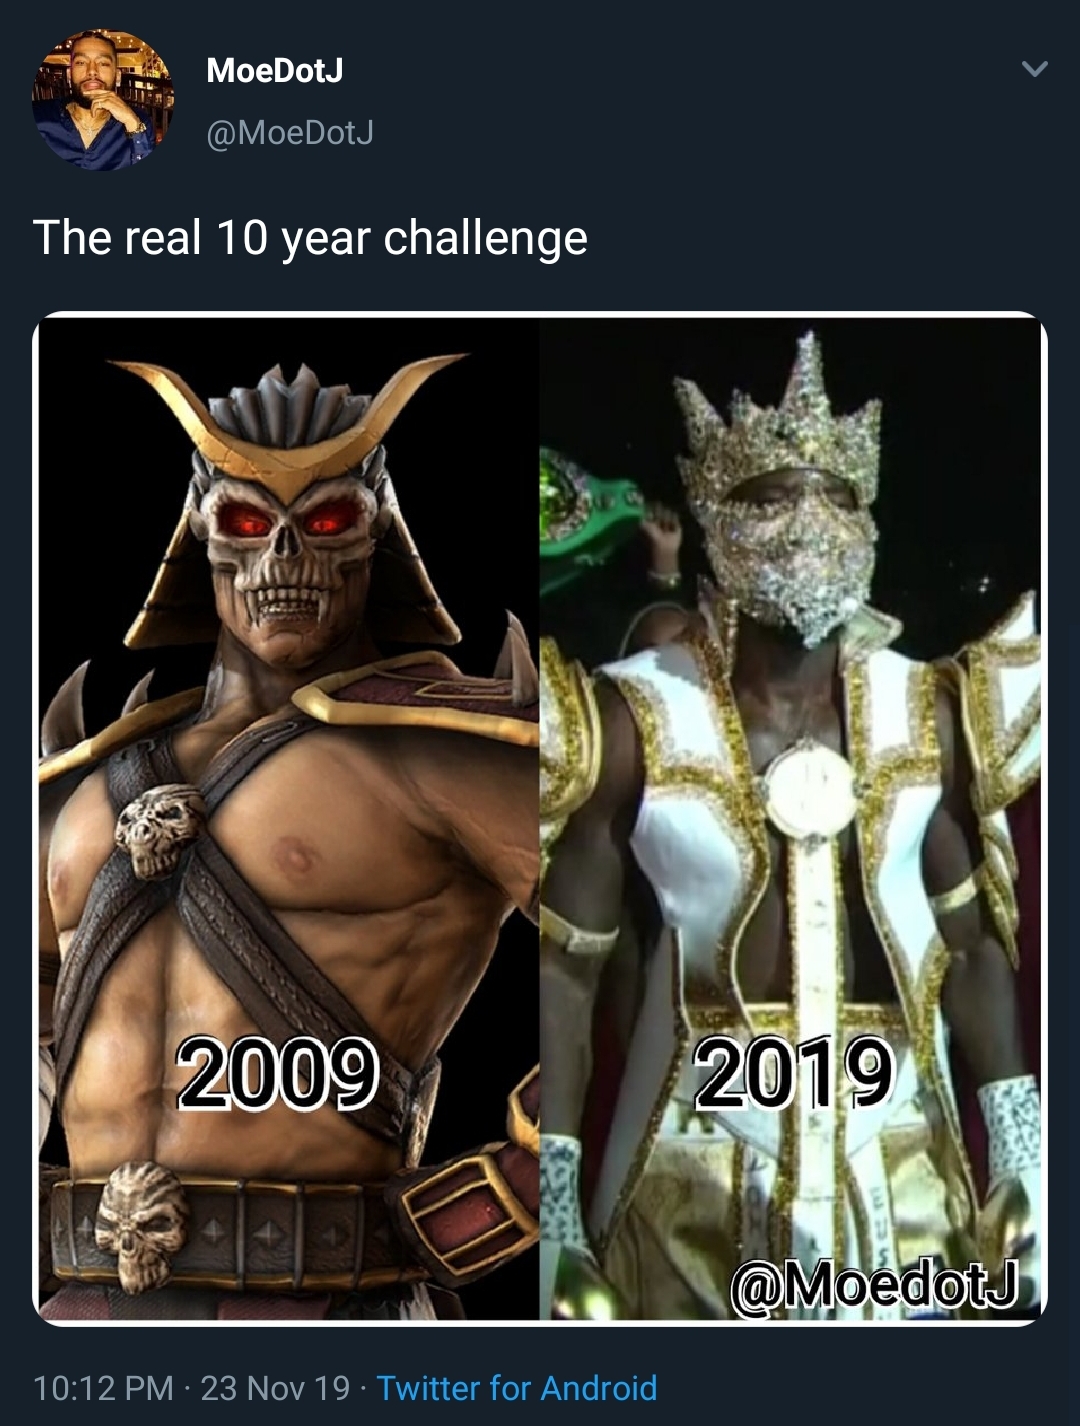 konqueror shao kahn - MoeDotJ The real 10 year challenge 2009 2019 23 Nov 19 Twitter for Android